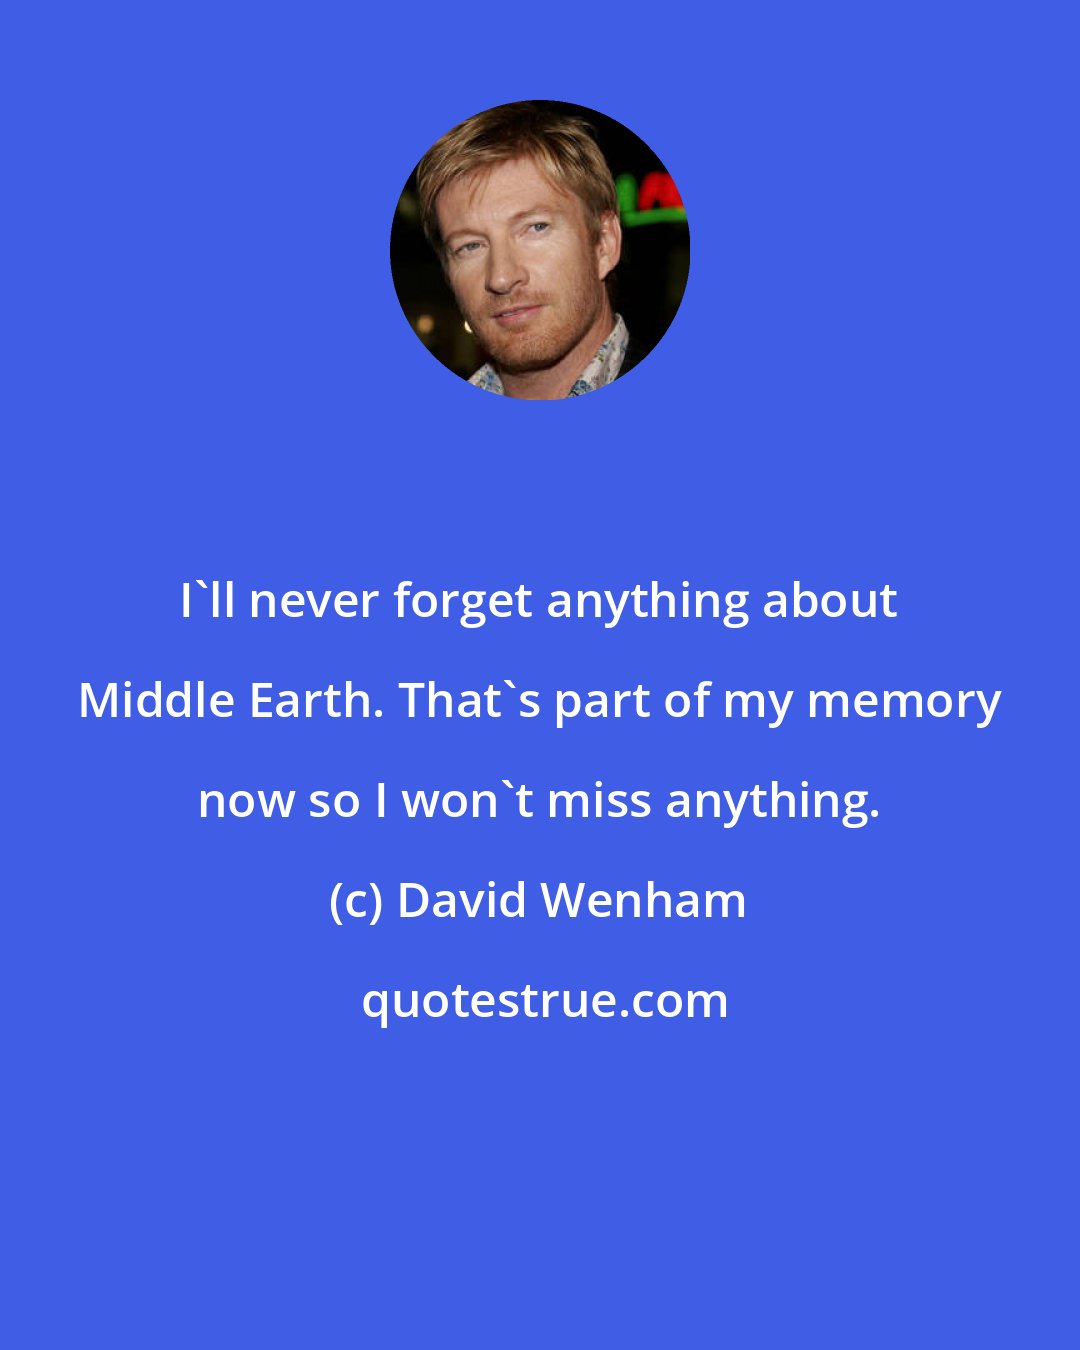 David Wenham: I'll never forget anything about Middle Earth. That's part of my memory now so I won't miss anything.